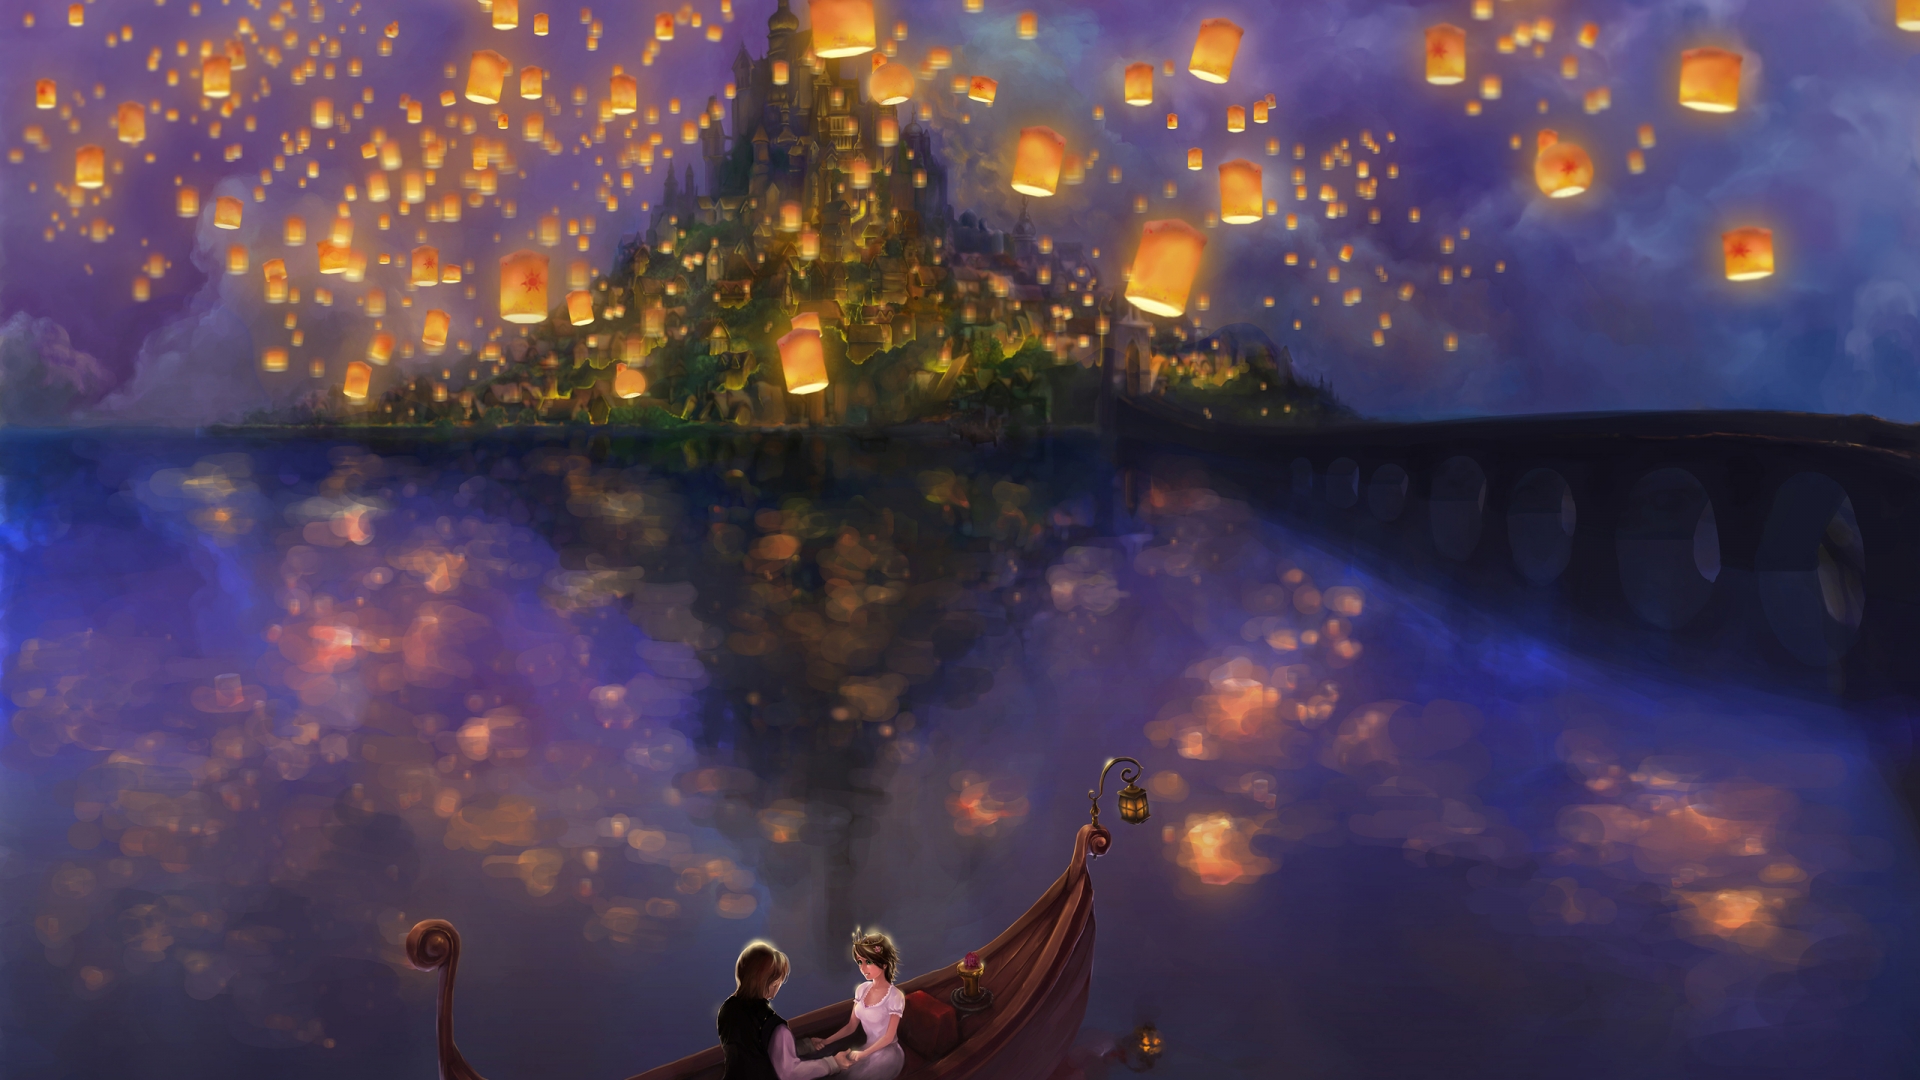 Tangled Musical Comedy Film for 1920 x 1080 HDTV 1080p resolution